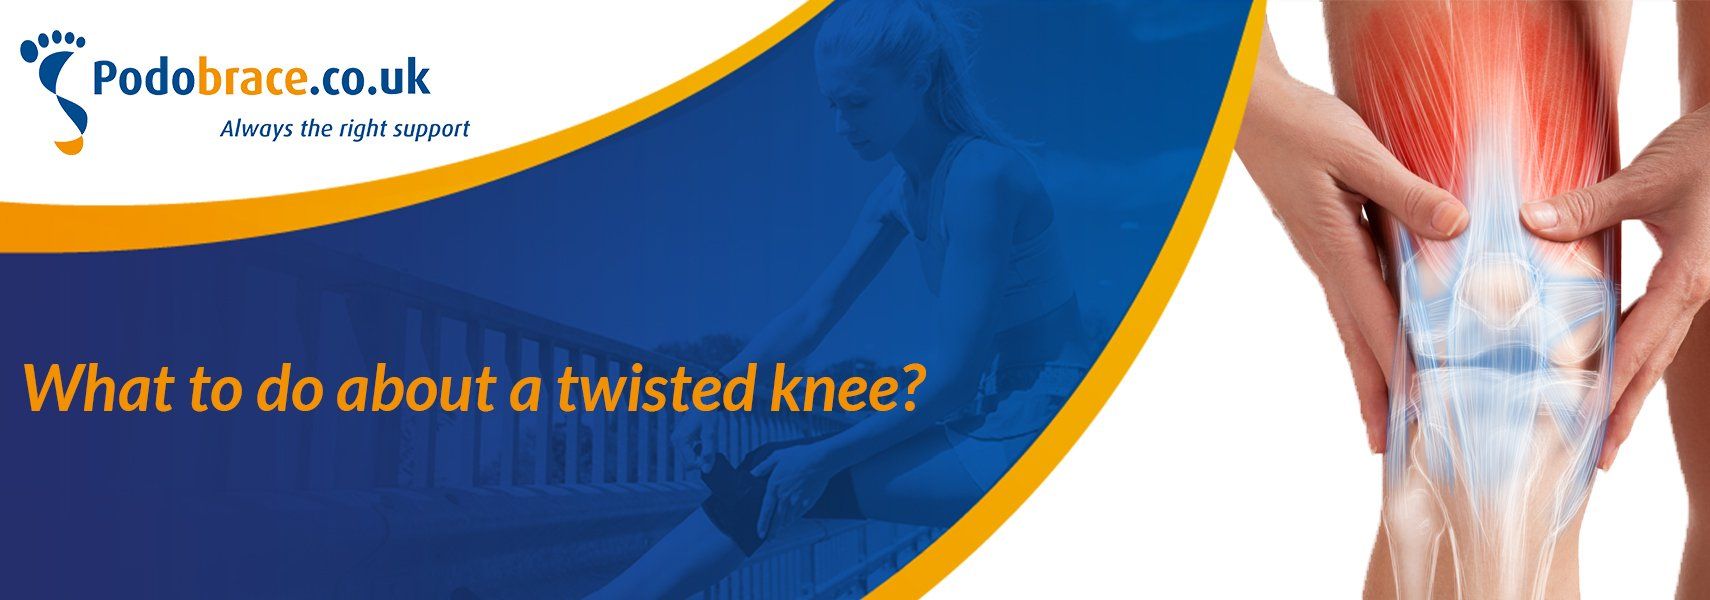 what to do about a twisted knee